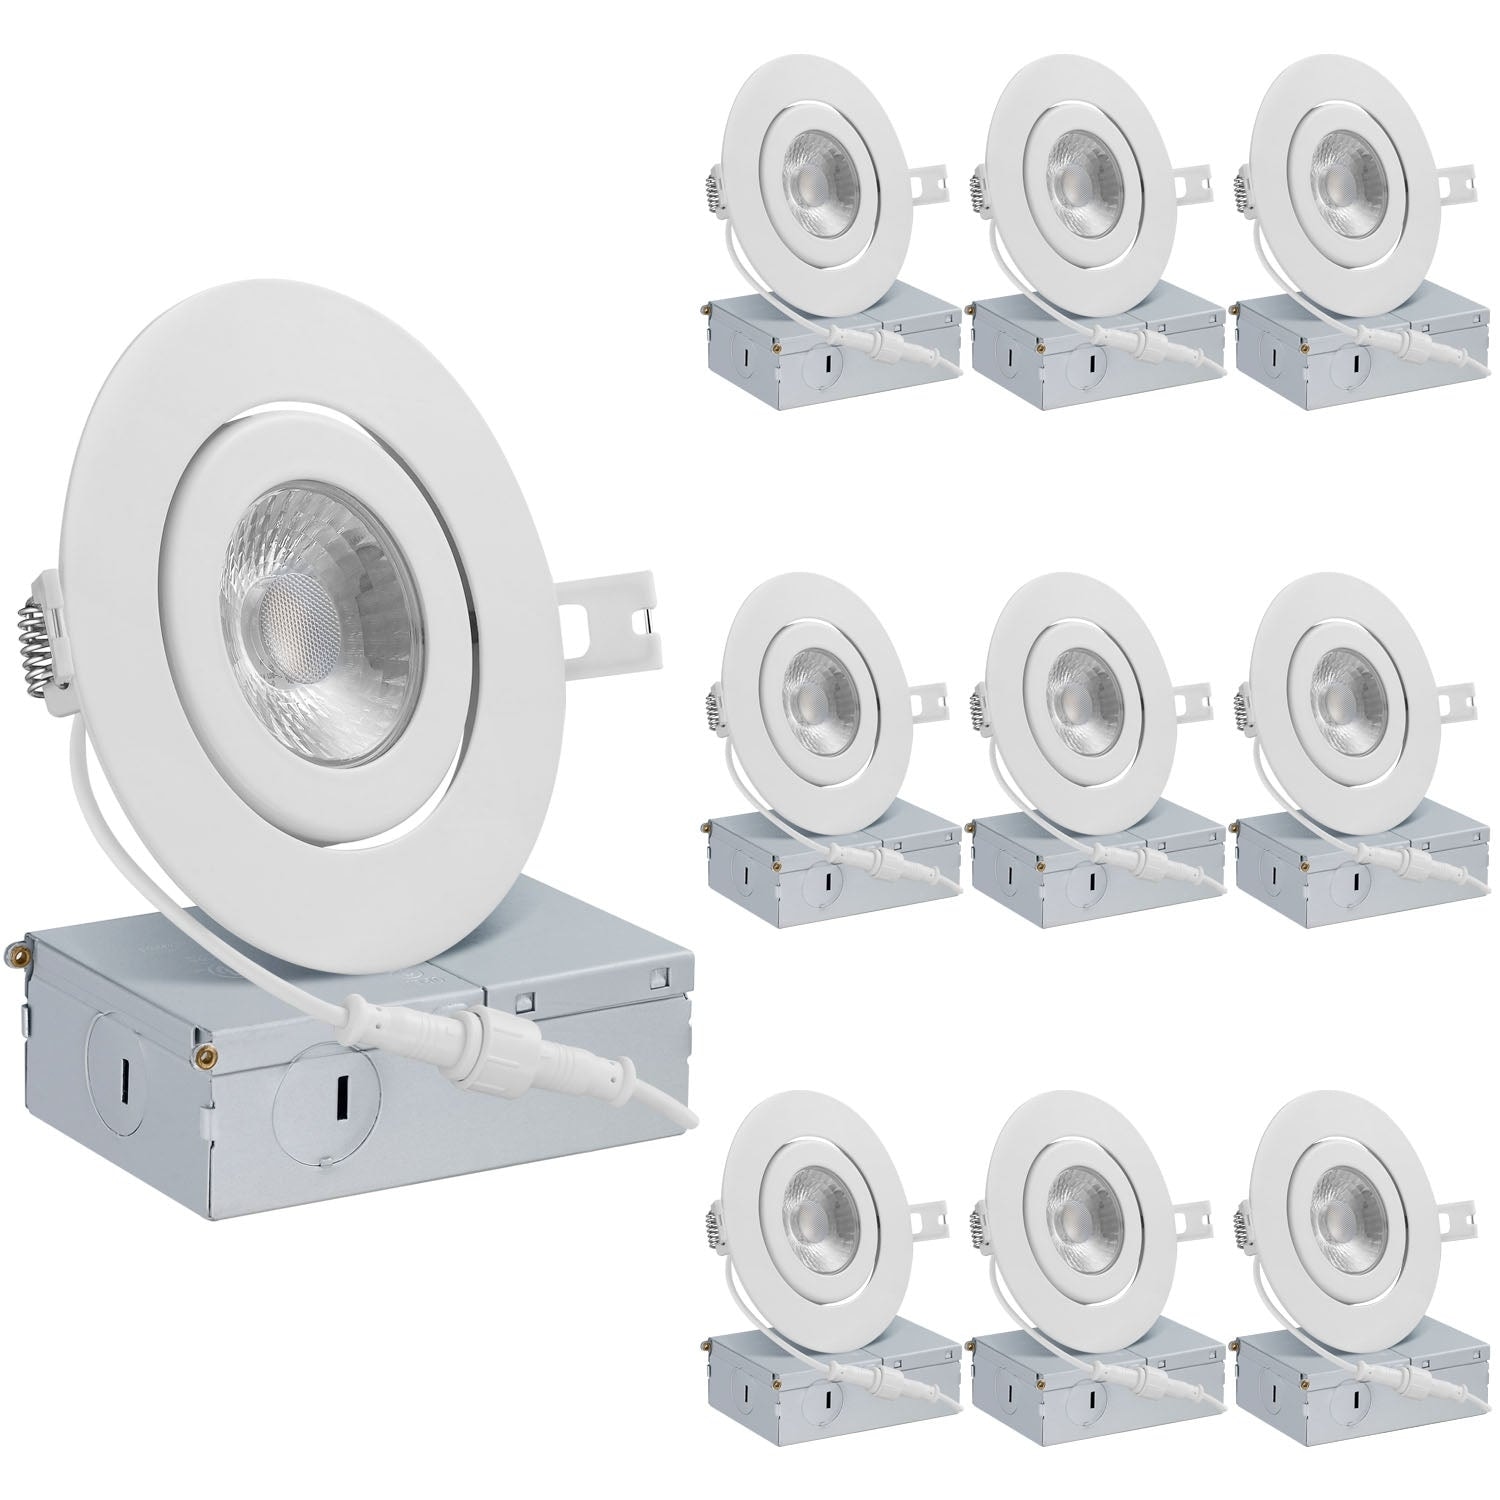 QPLUS 4 Inch Adjustable Eyeball Gimbal LED Recessed Light Canless, 10W, Dimmable, ETL Listed (10 Pack)